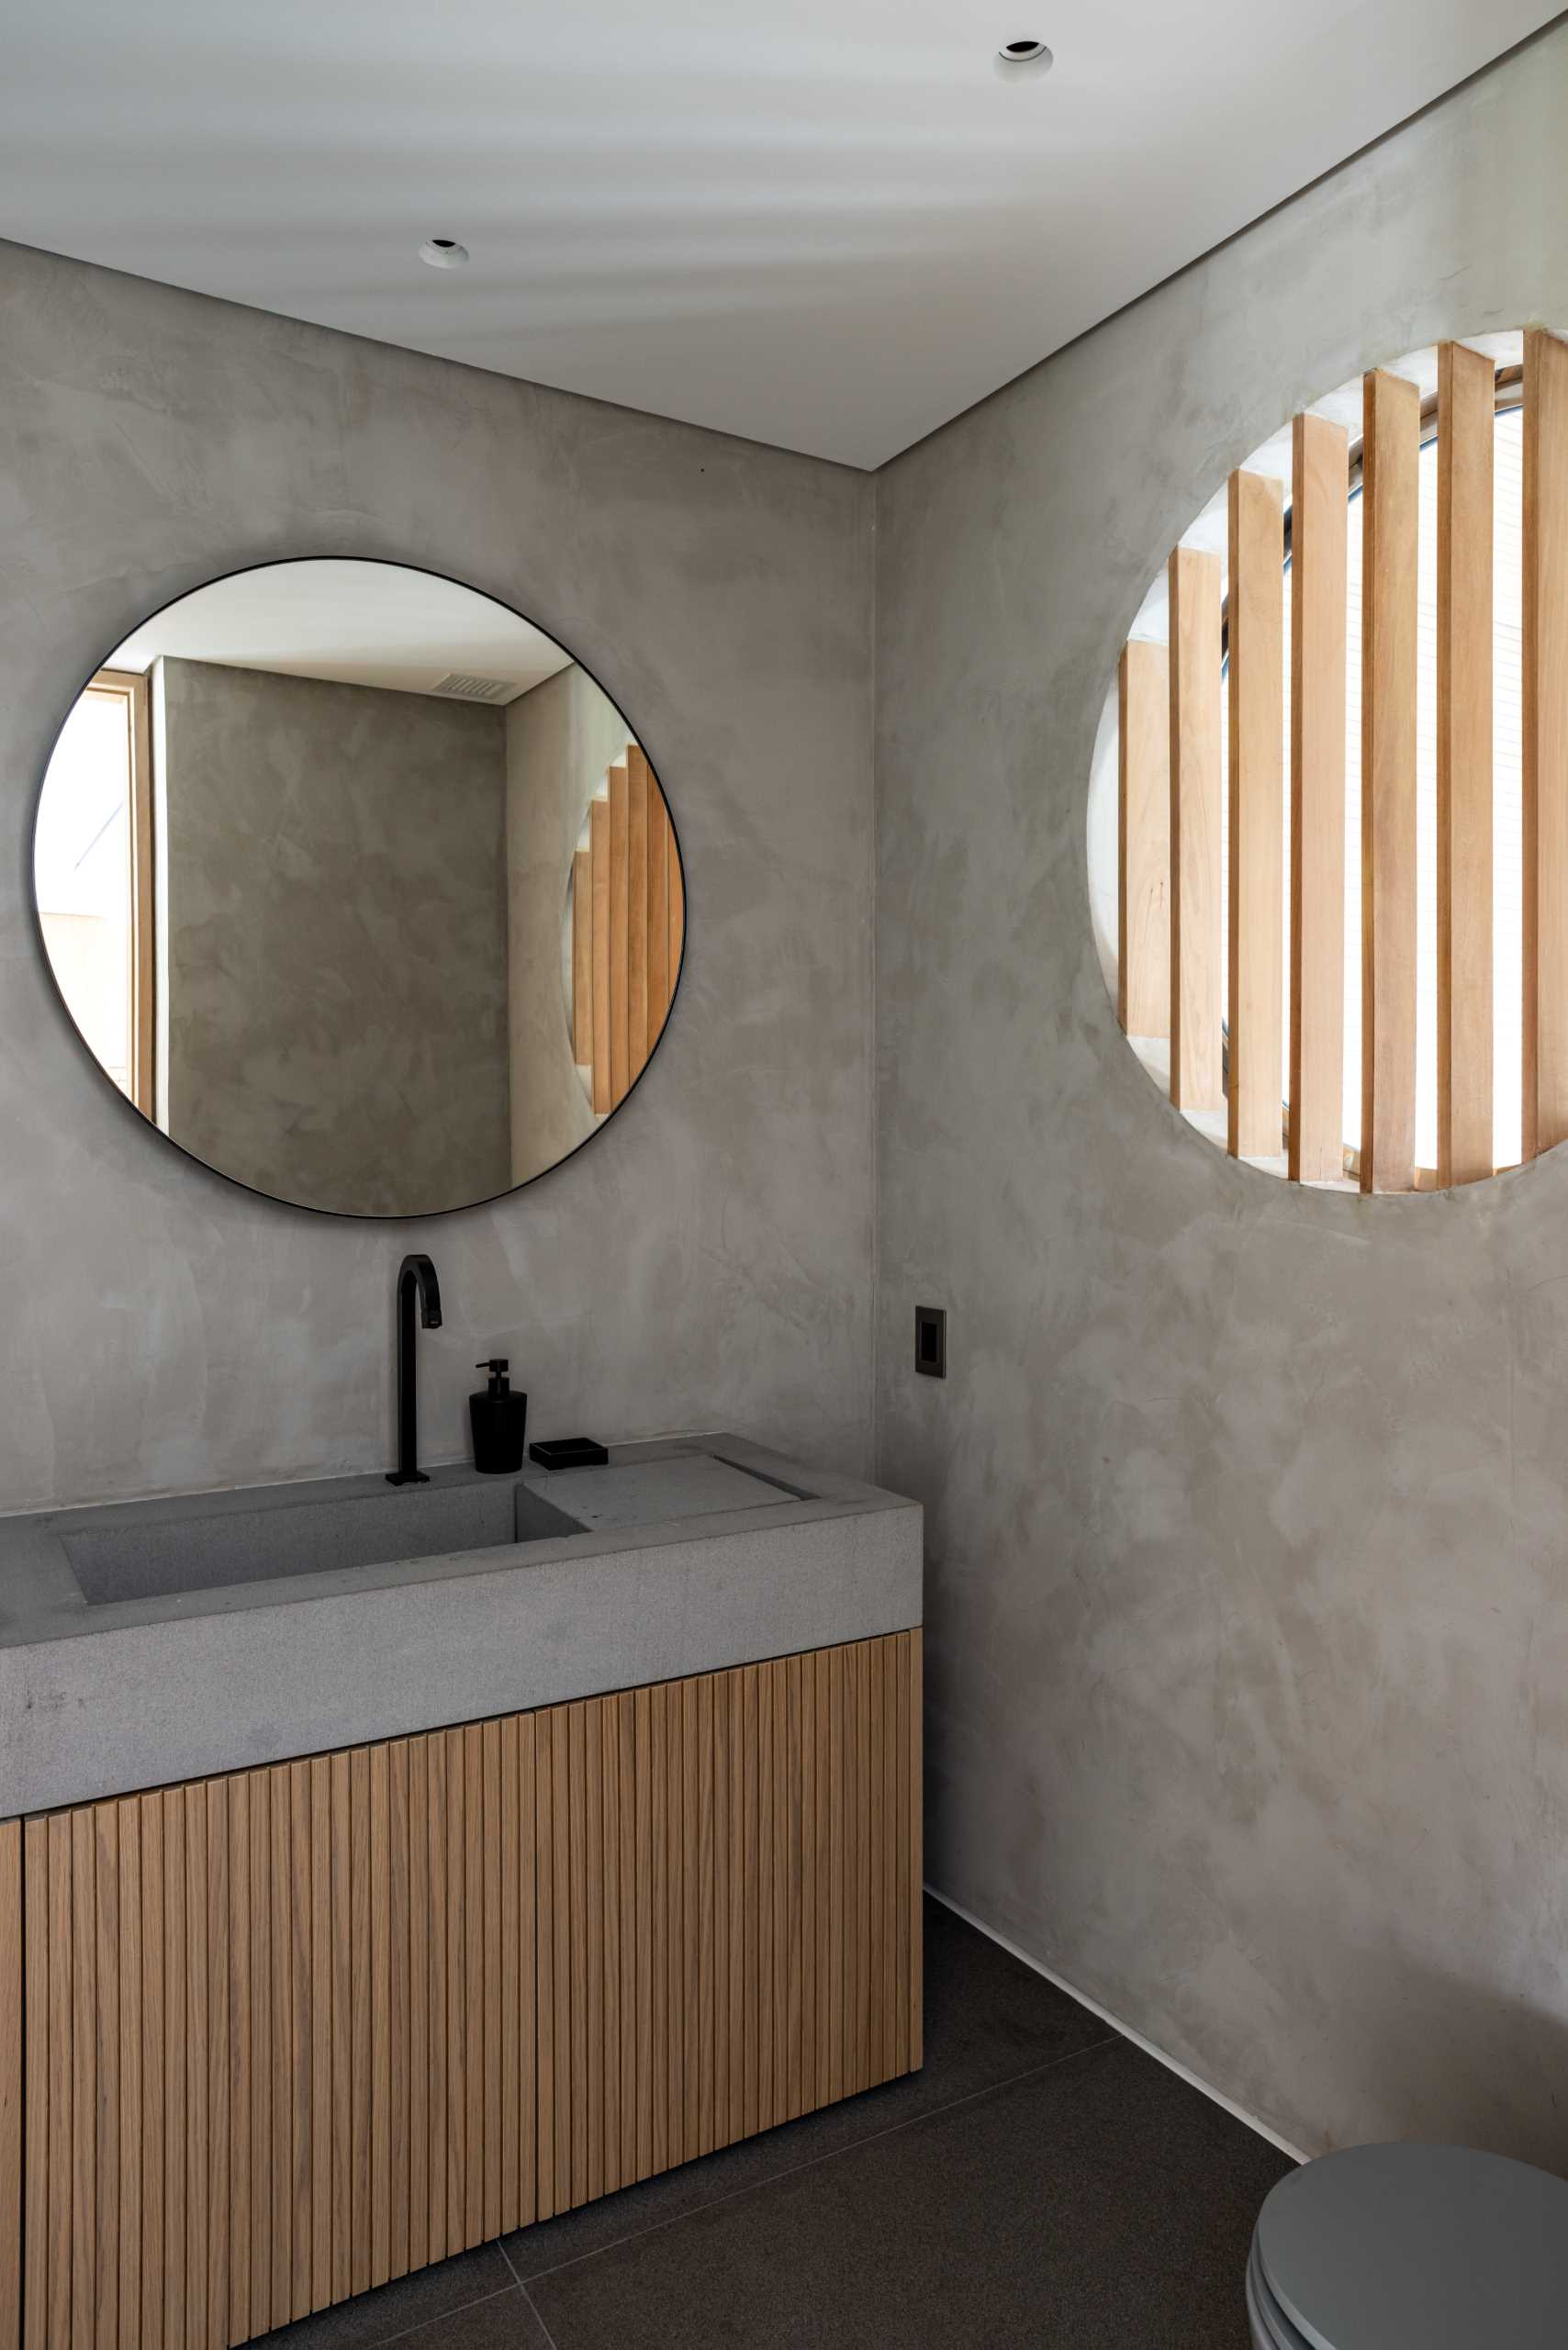 A small powder room with a round window that looks through to a sauna.